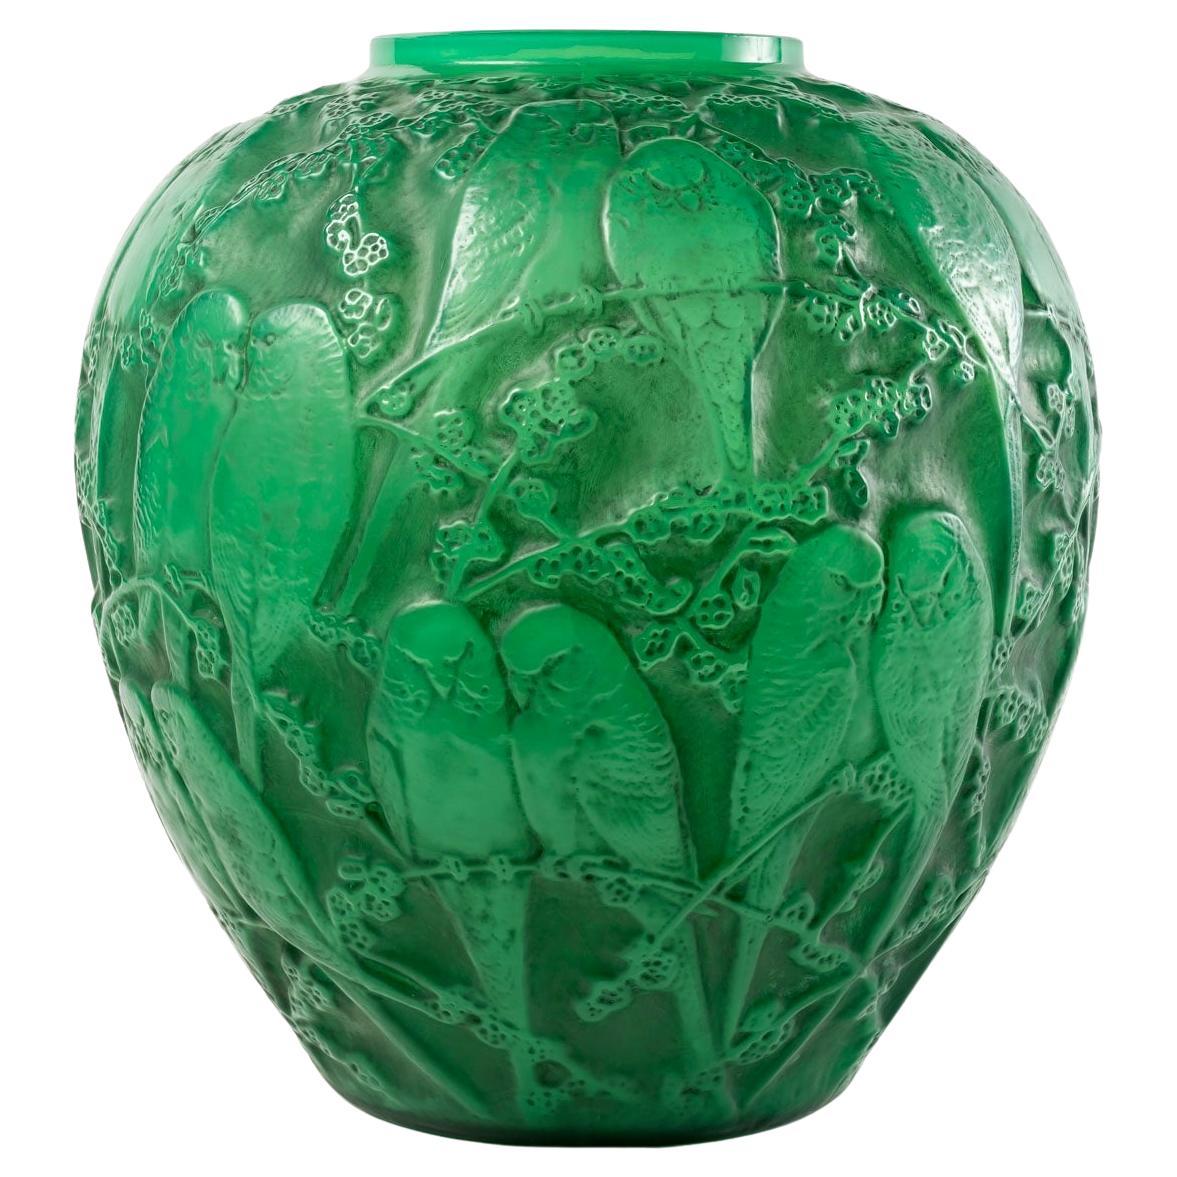 1919 René Lalique - Vase Perruches Cased Jade Green Glass With Grey Patina